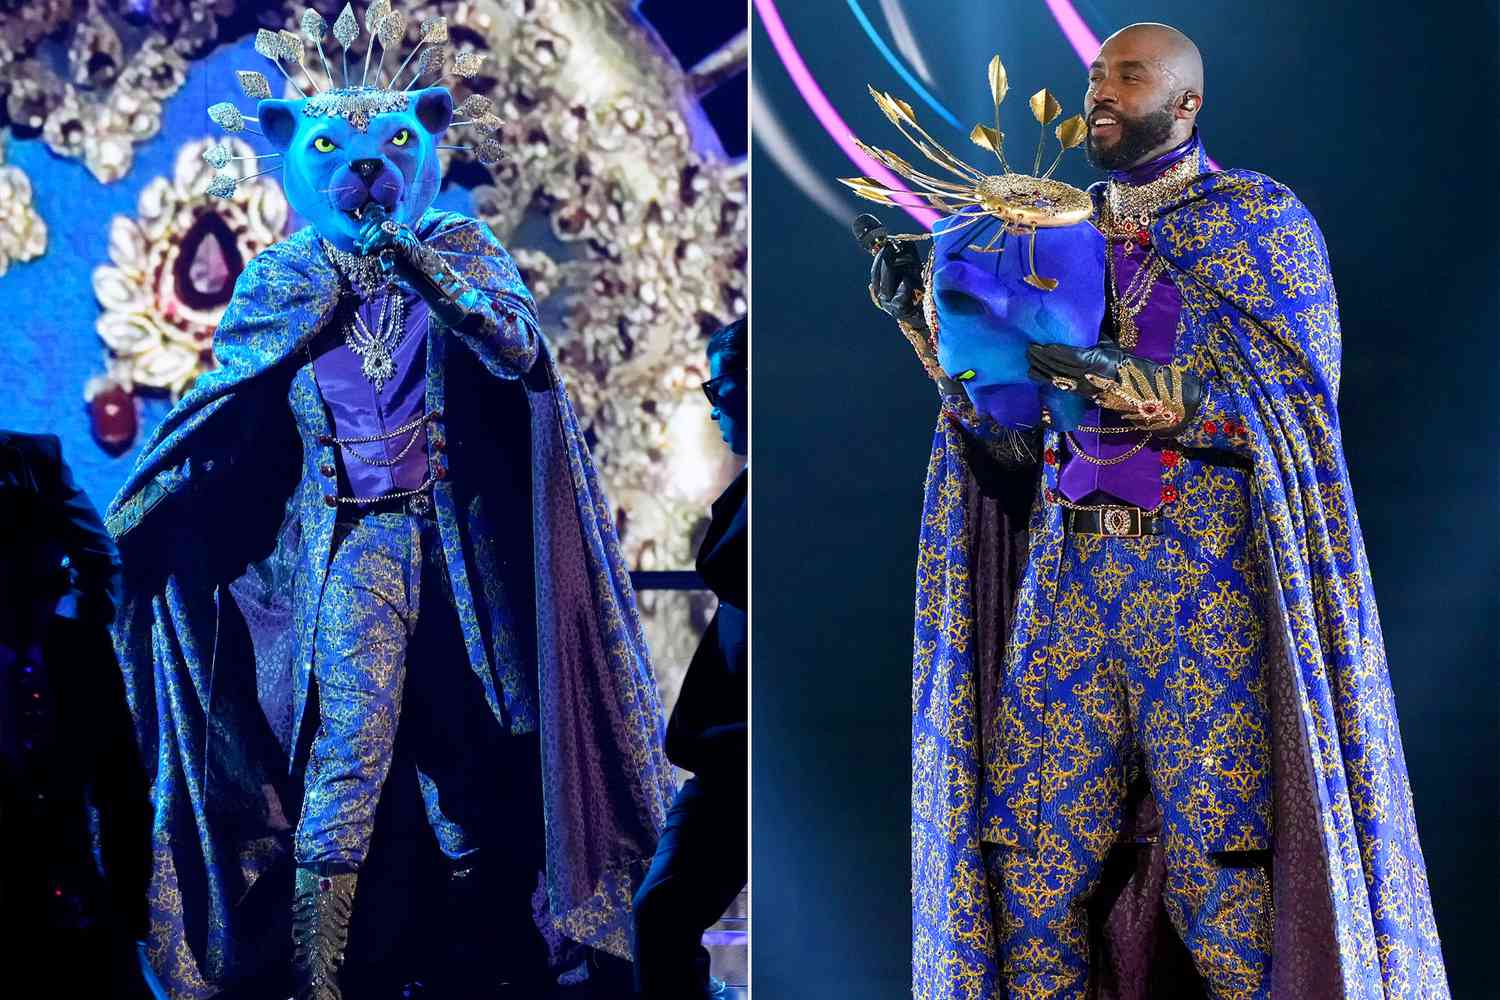 Montell Jordan did 'The Masked Singer' to prove he's more than his biggest hit